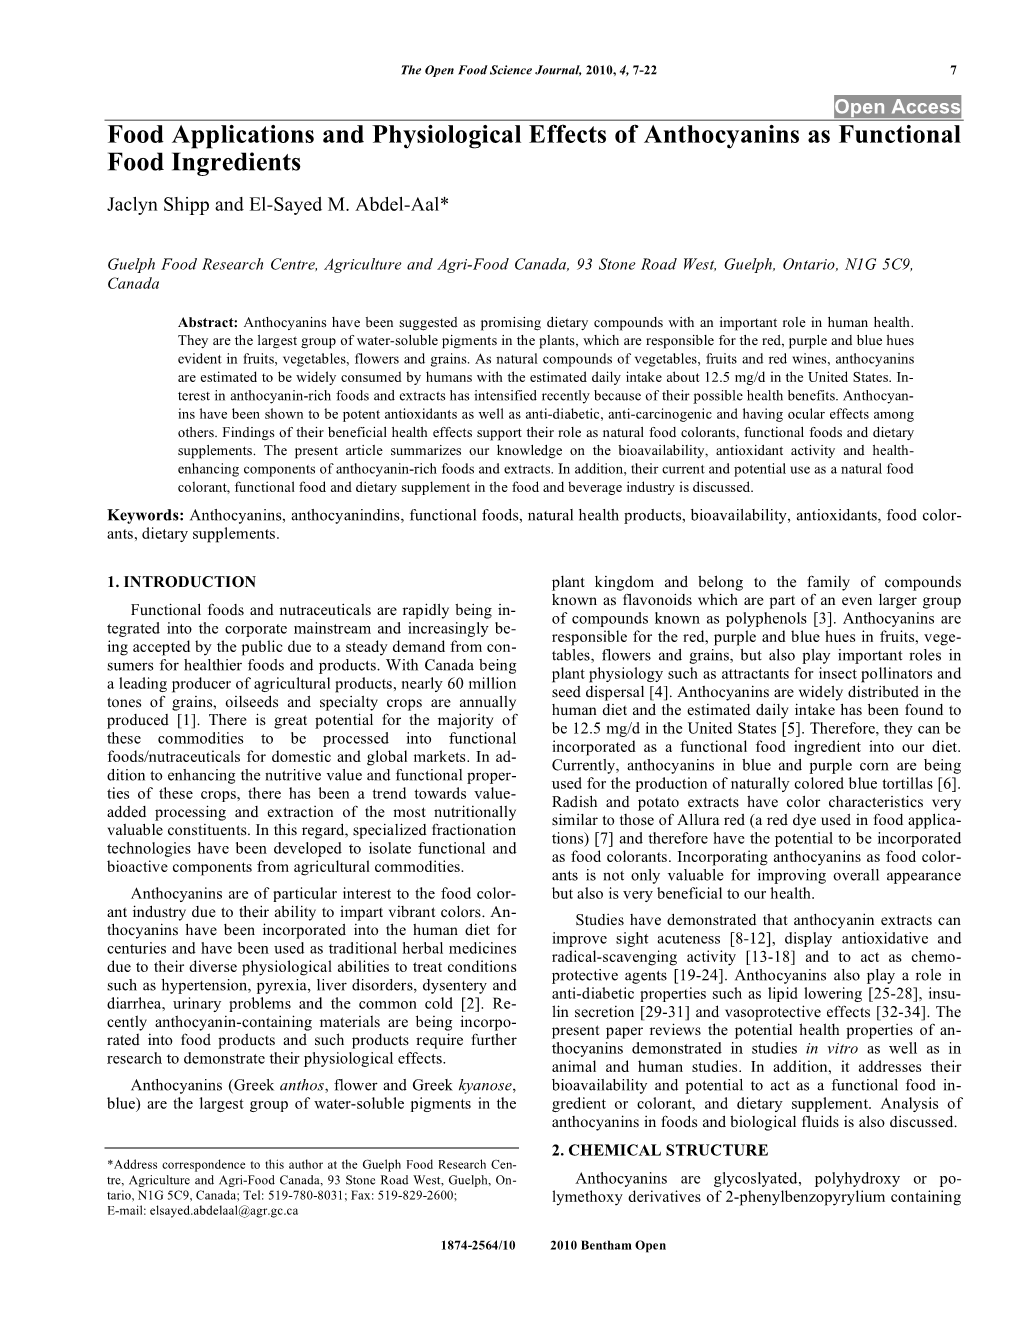 Food Applications and Physiological Effects of Anthocyanins As Functional Food Ingredients Jaclyn Shipp and El-Sayed M